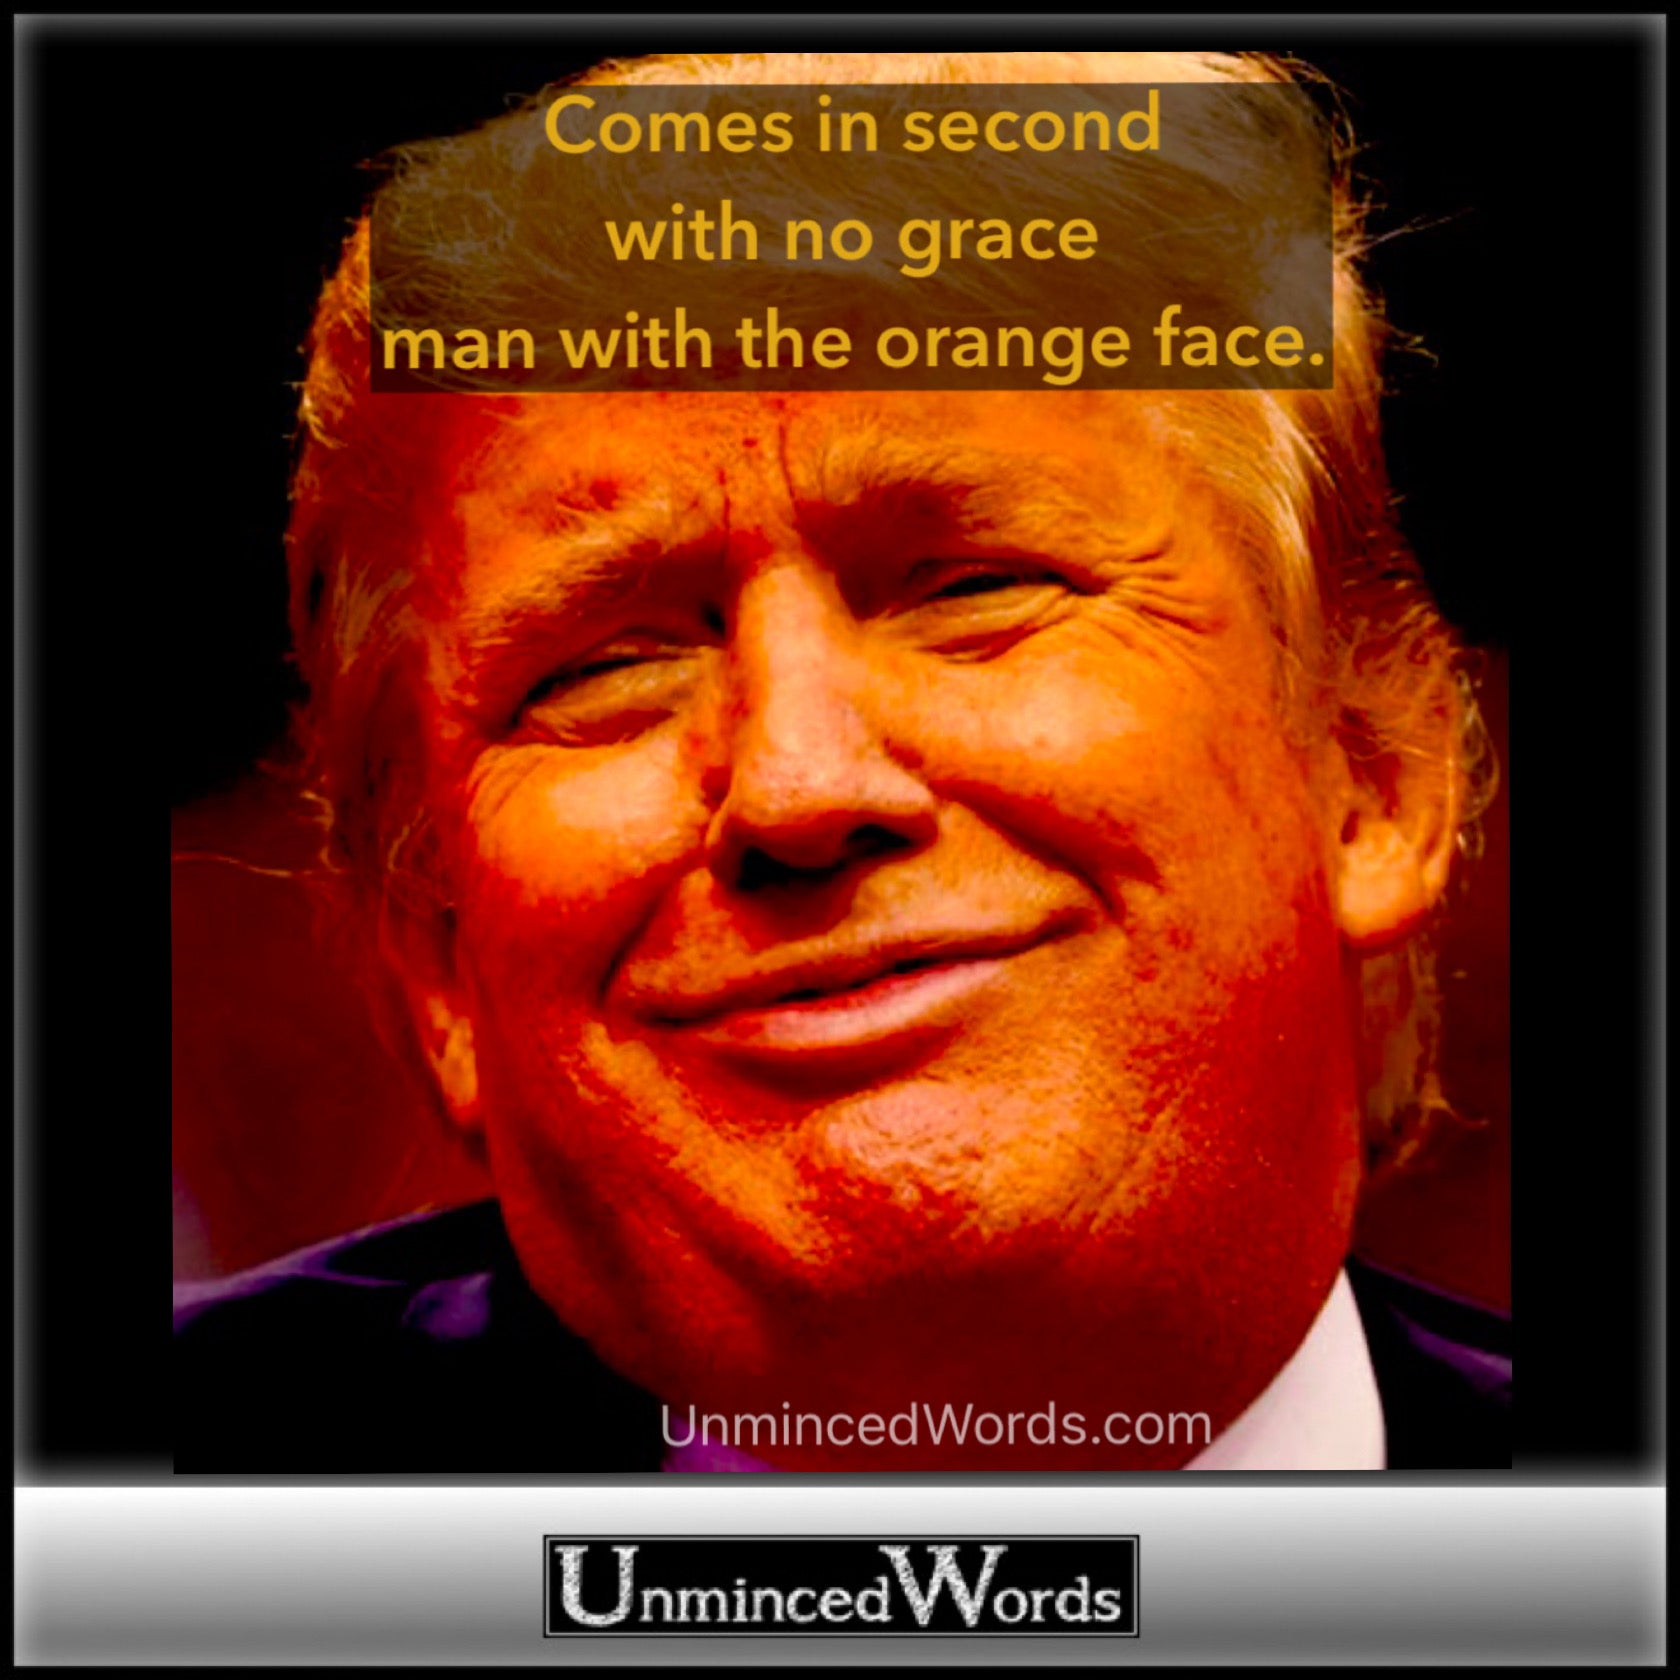 Comes in second, with no grace, man with the orange face.